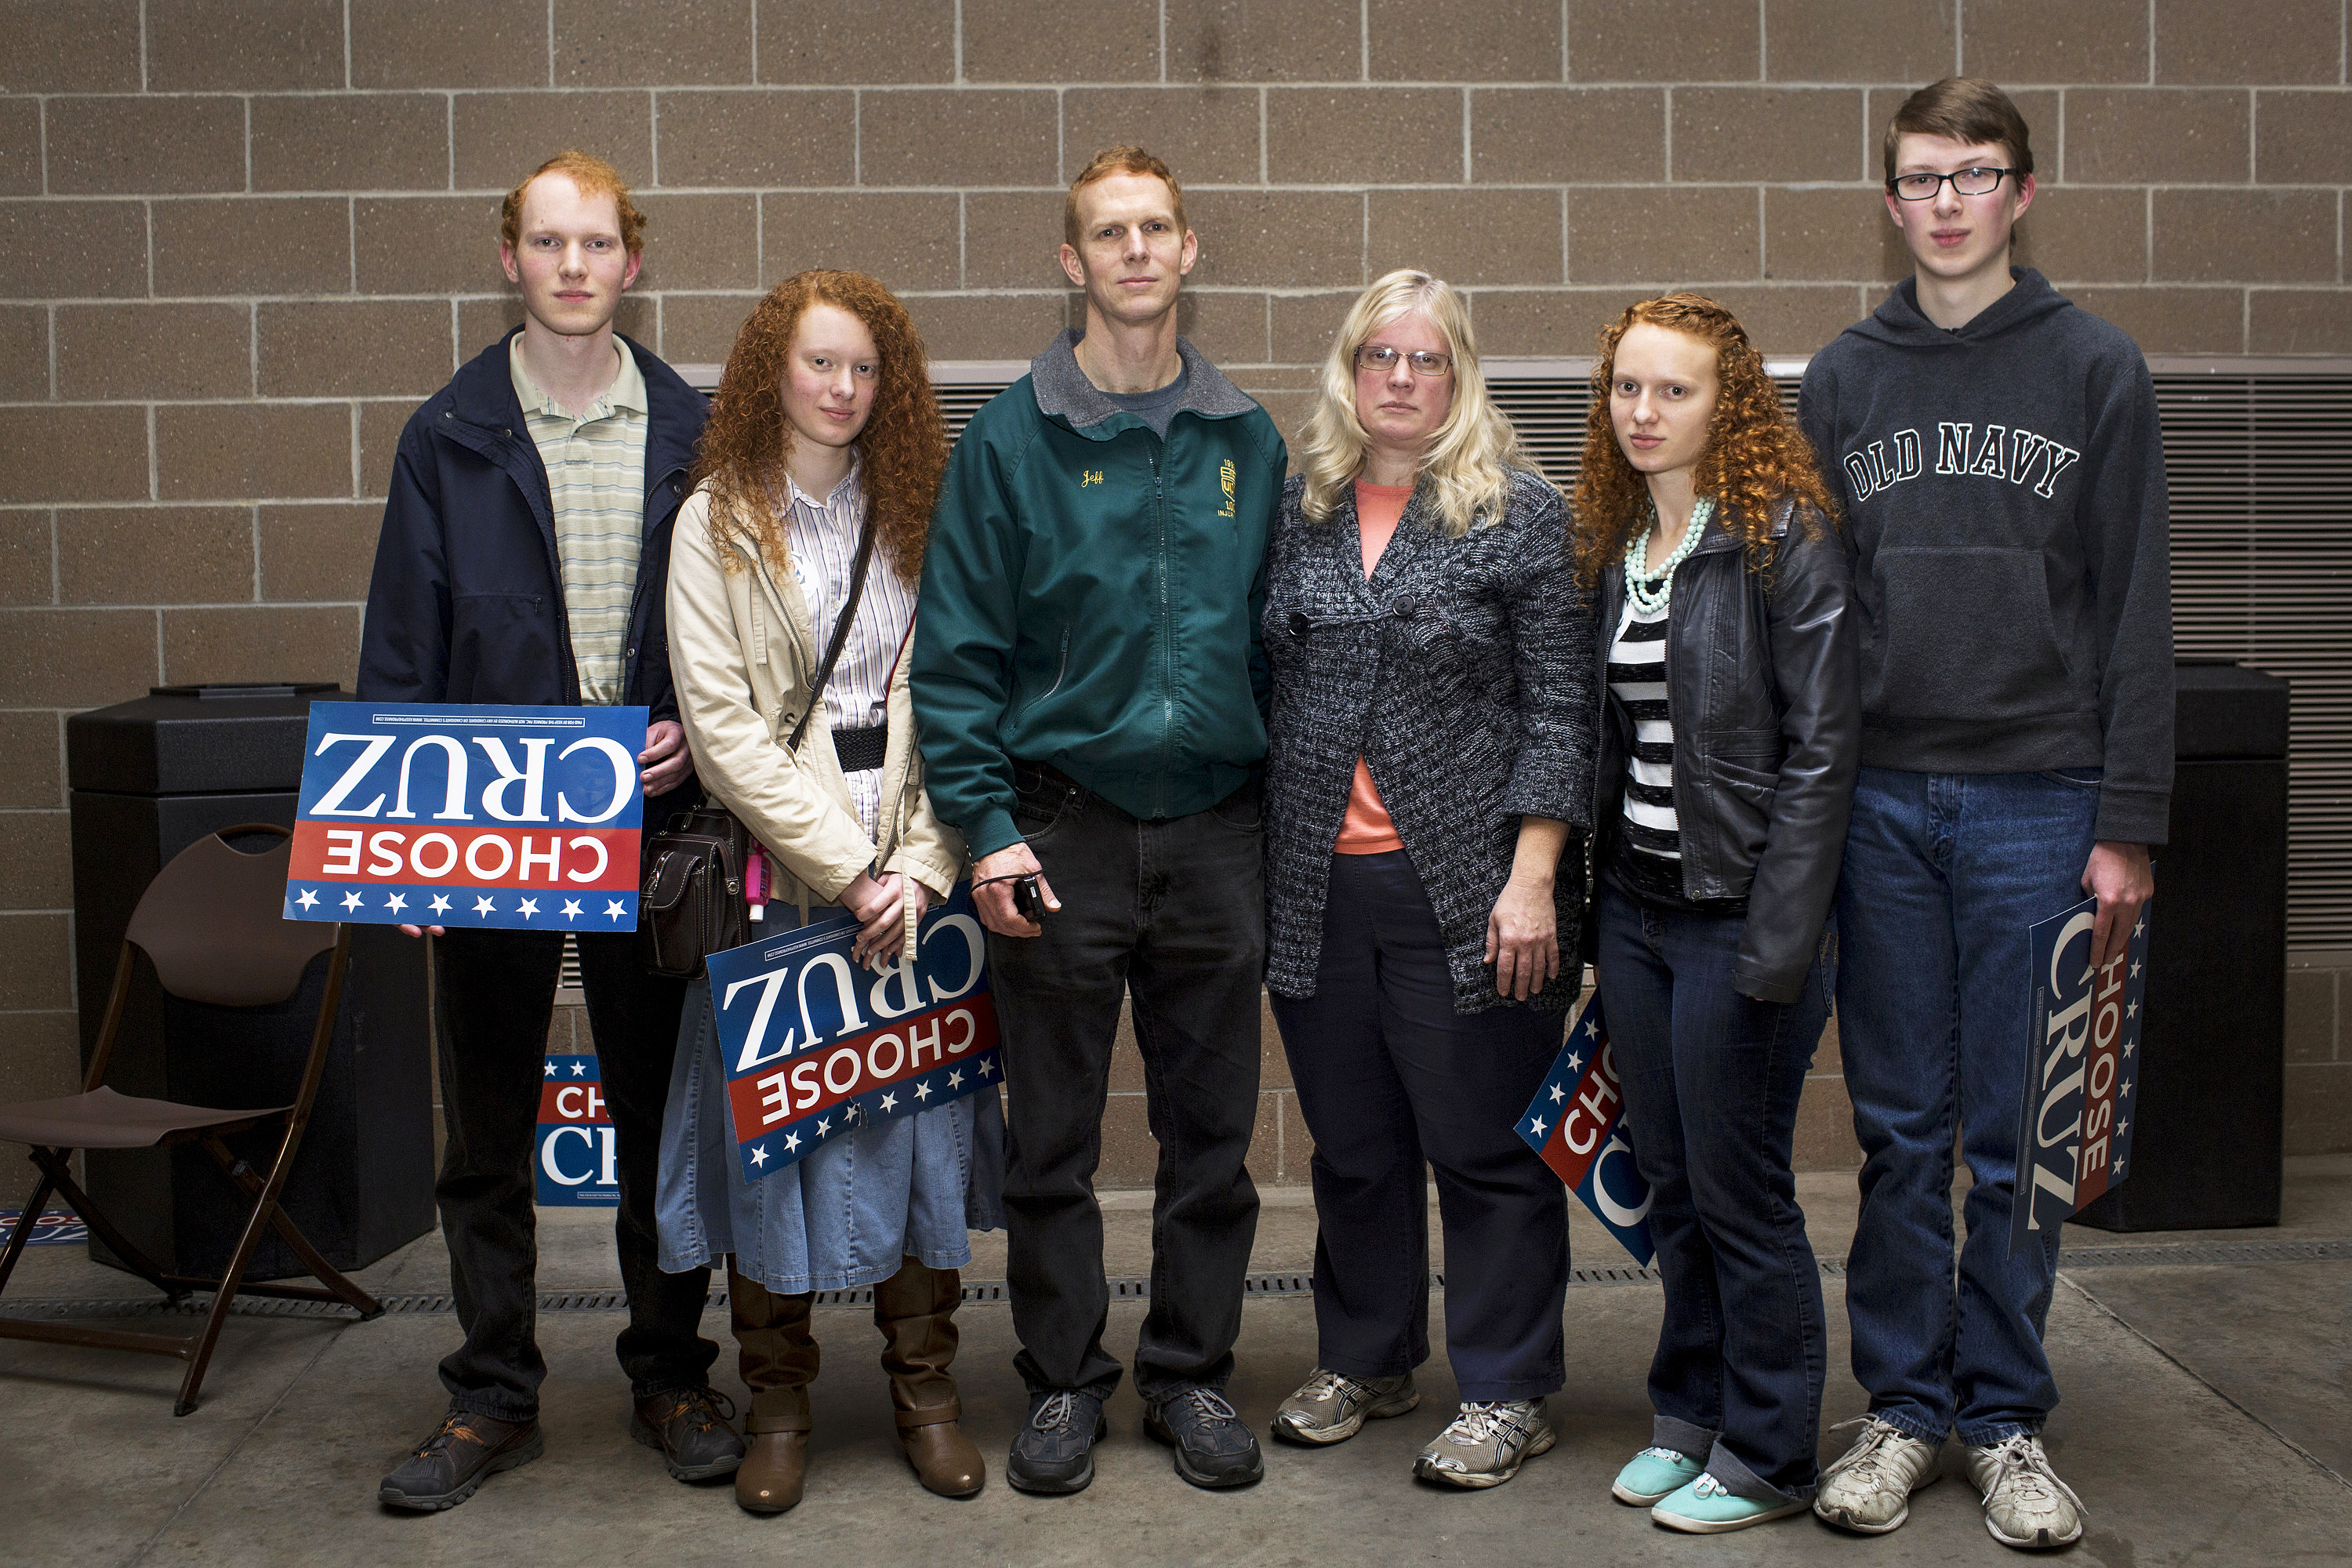 Supporters attend a rally for Ted Cruz in Des Moines, Iowa, on Jan. 31, 2016. The  Stilwell family pose for a portrait after the rally. Jeff, the father of the family, said  Ted Cruz is solid in God. He doesn't just say it, or sign bills, he fights for what he believes. He brings the fight to the battlefield, and that's what we need. He knows he's going to heaven. He's a true Christian. Without God we're nothing. There are absolutely moral wrongs and rights and he's fighting for what's right.